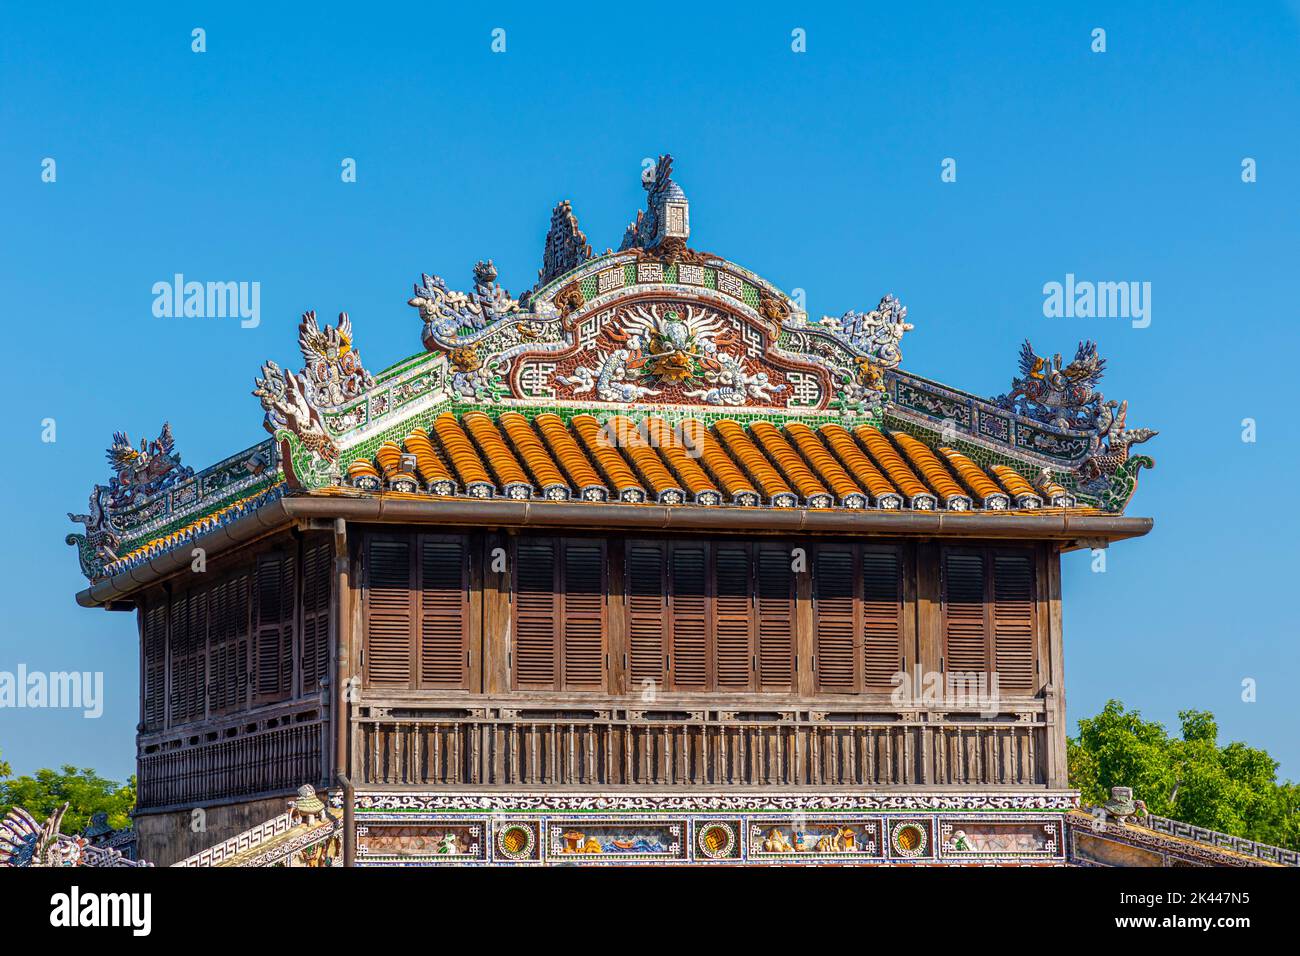 Royal Theater, Imperial City, Hue, Thua Thien Hue province, Vietnam Stock Photo